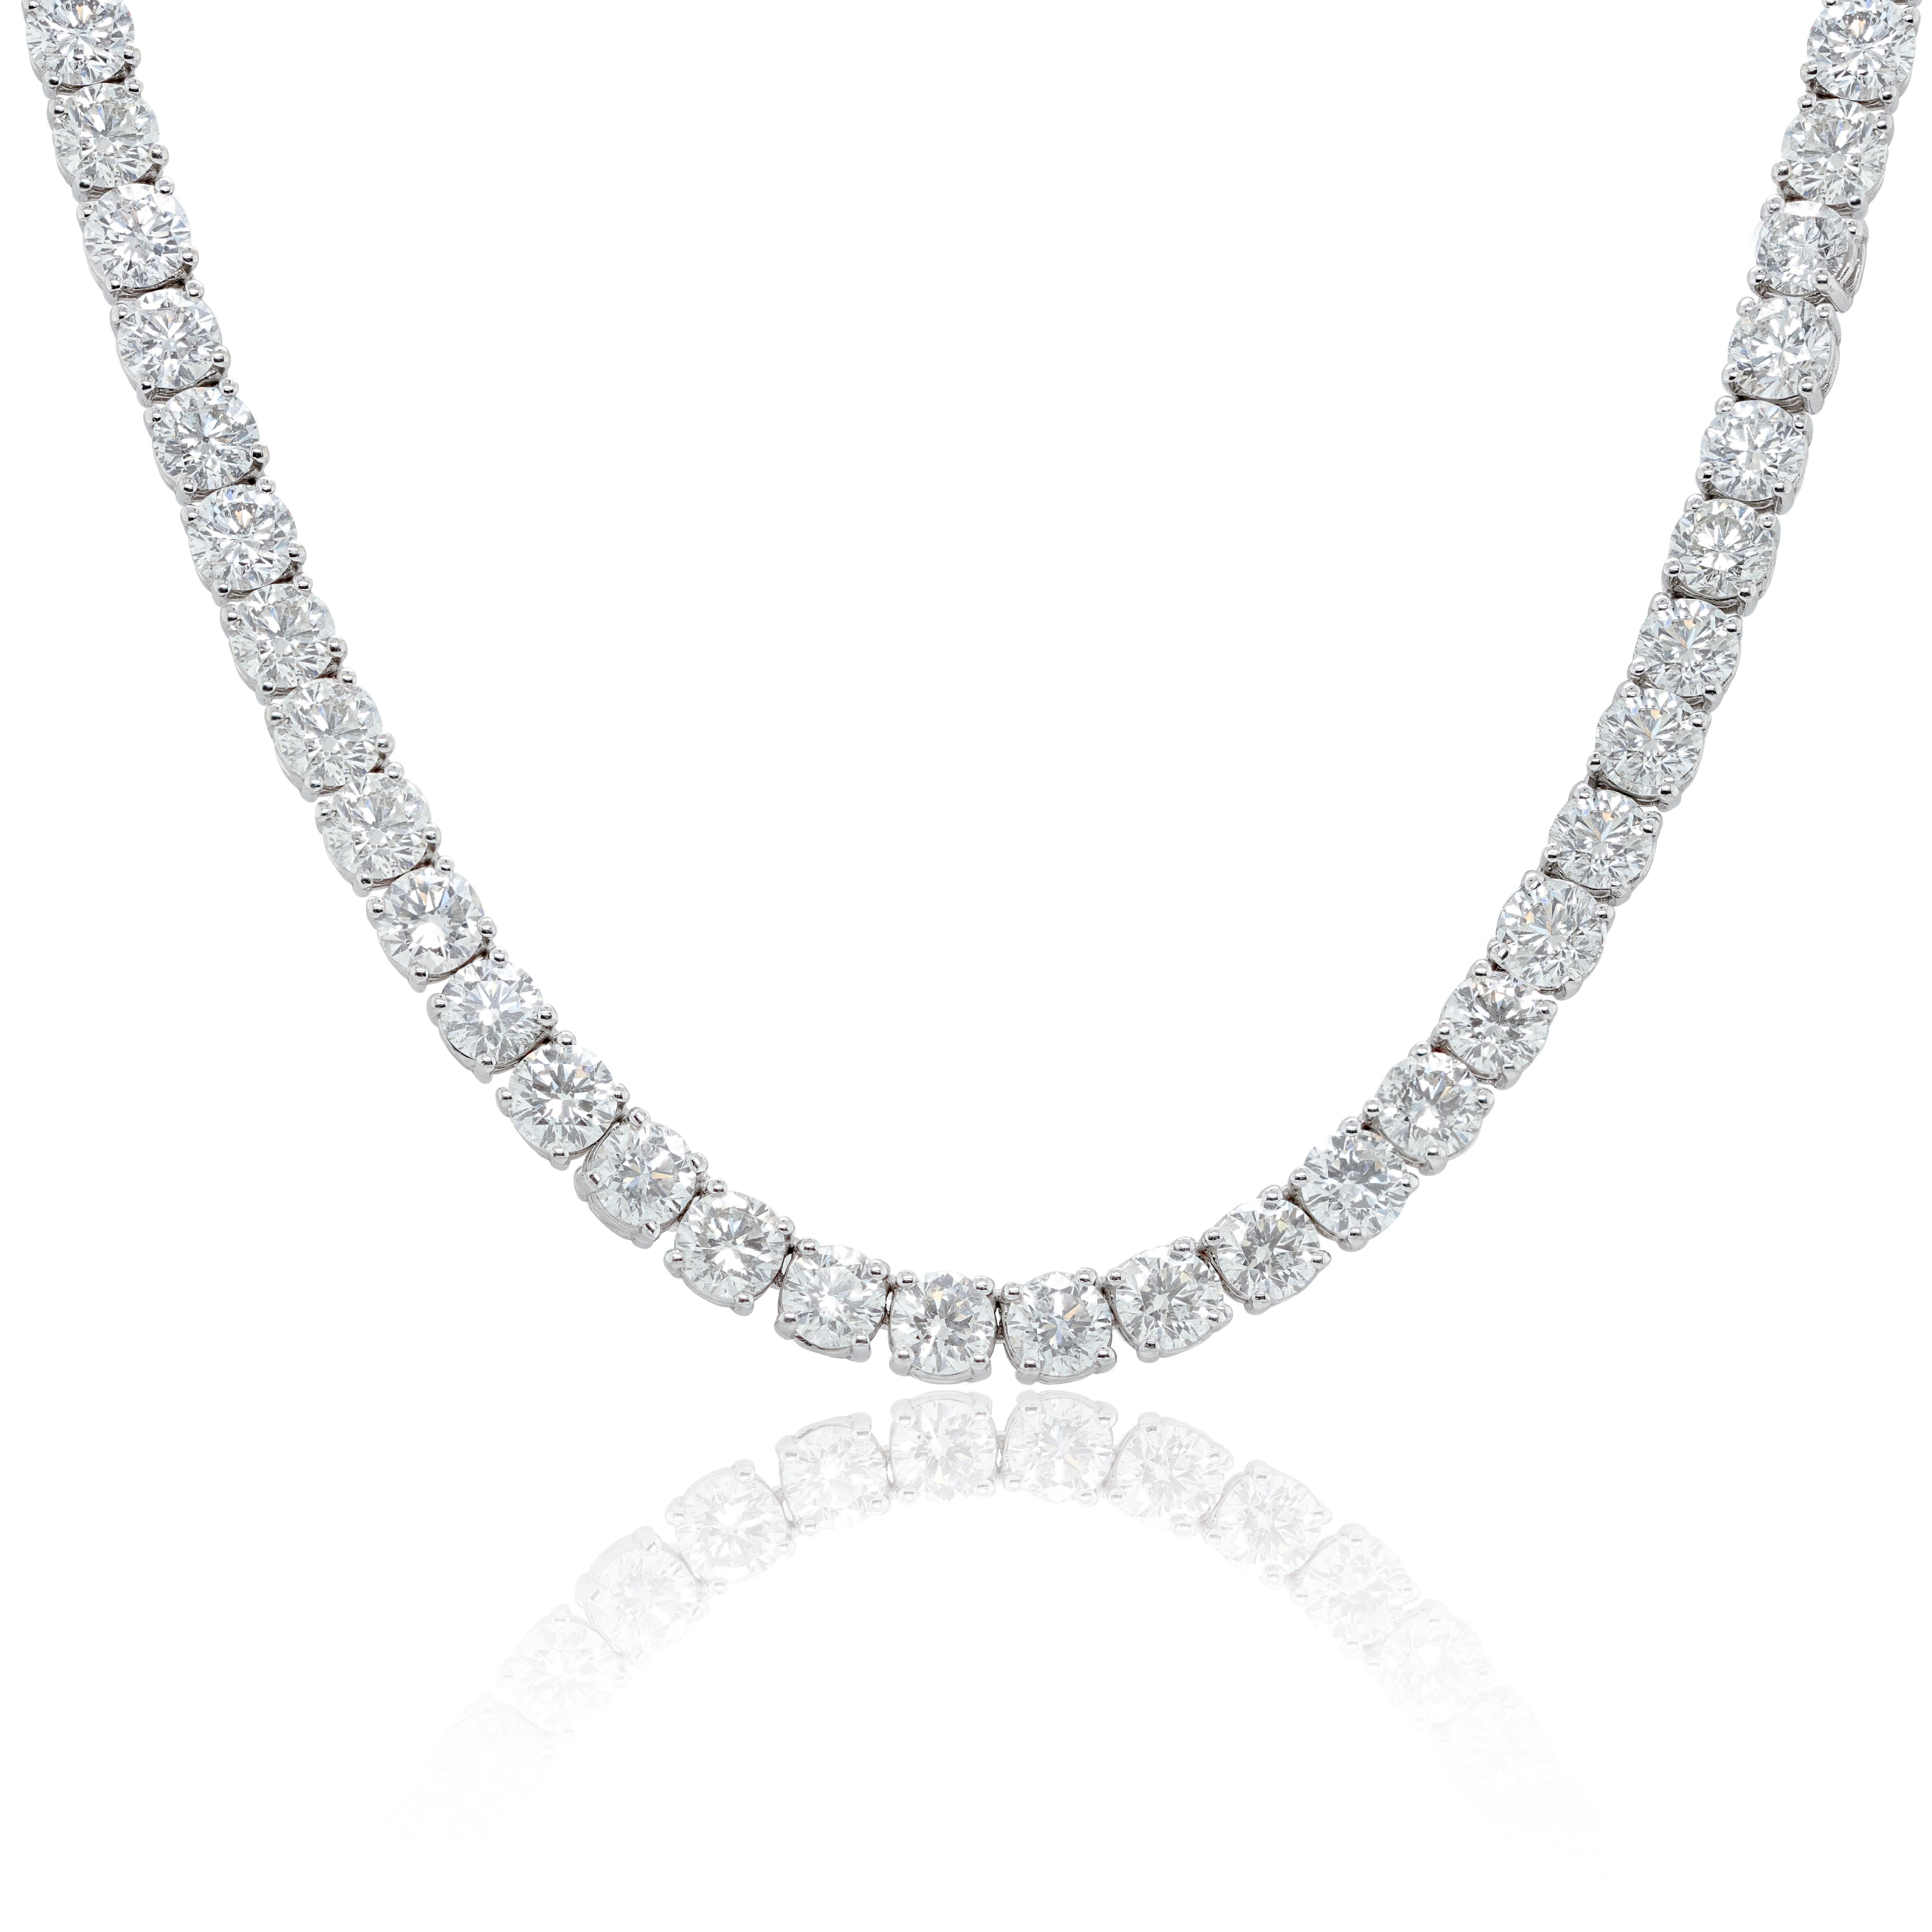 Platinum 52 Carat Straight Line Diamond Tennis Necklace G-H color, SI clarity diamonds.

This product comes with a certificate of appraisal
This product will be packaged in a custom box

Composition:
Platinum 
52.00 cts white diamonds
72 stones/